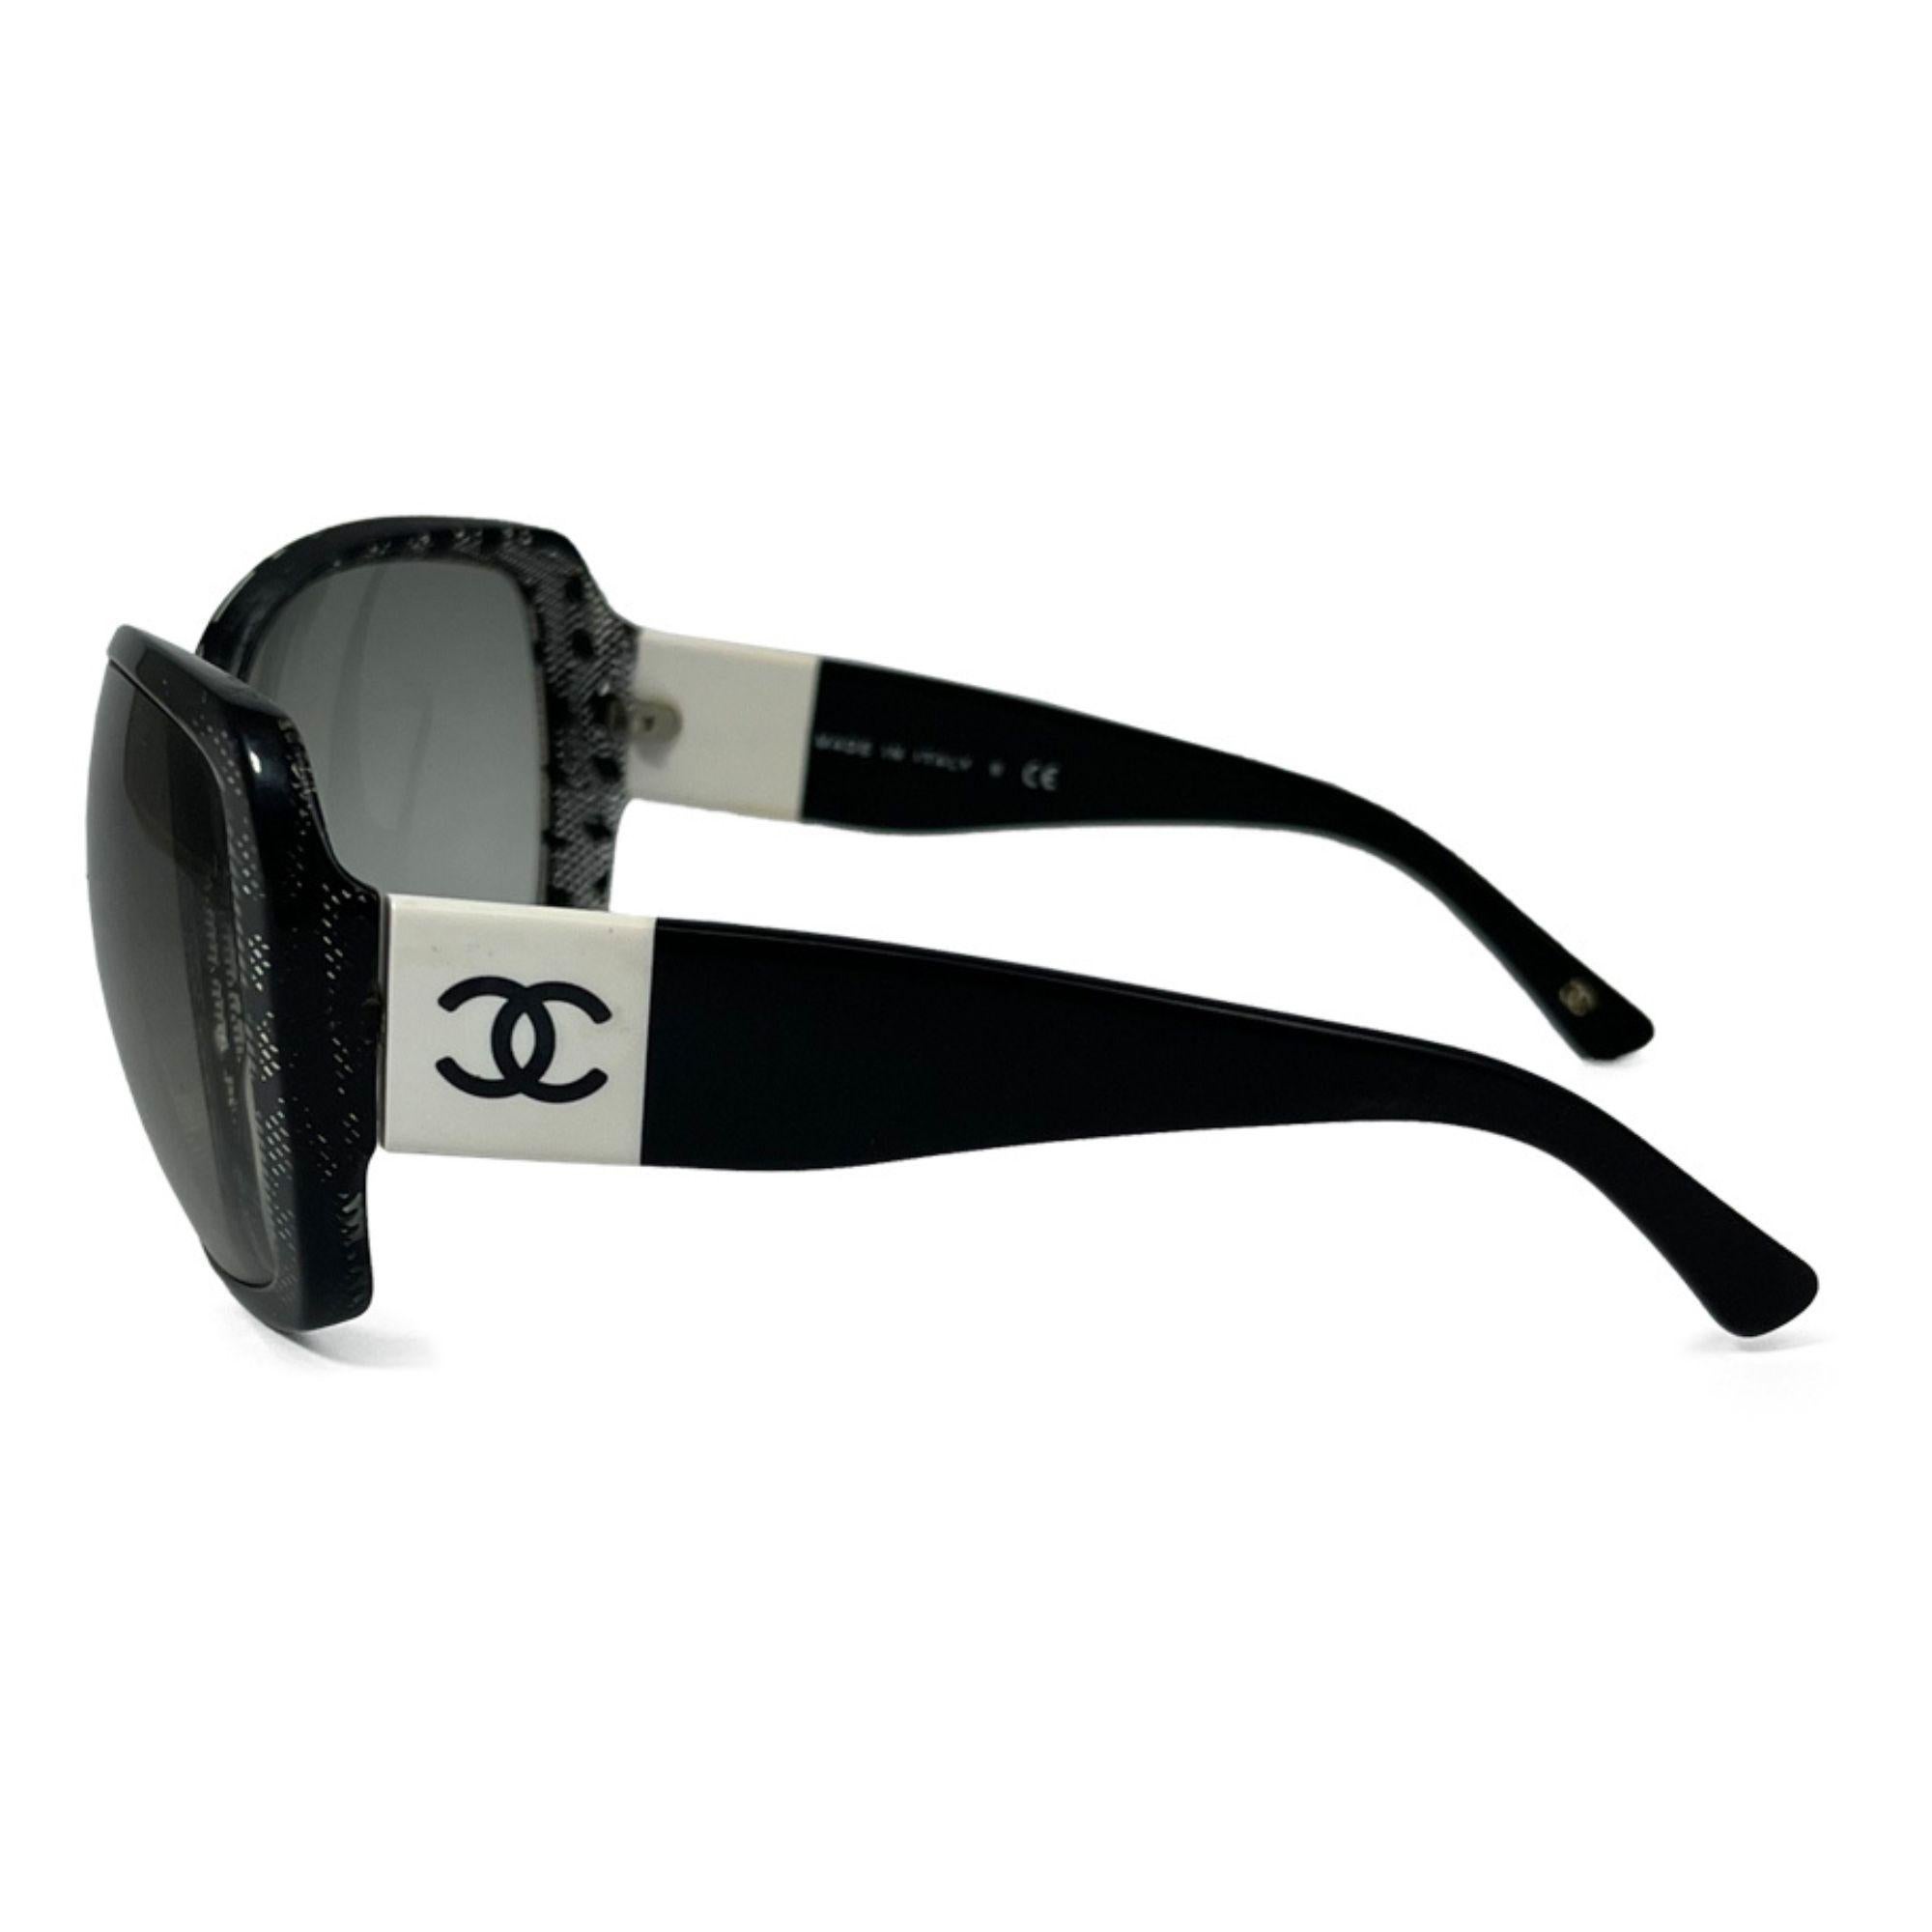 Chanel Lace CC Sunglasses Black 5145. Featuring black frames with large squared rims and lenses with a gradient gray. The arms are a medium width with a white band and a black Chanel CC logo.

Hardware: Acetate
Lens: Black
Size: